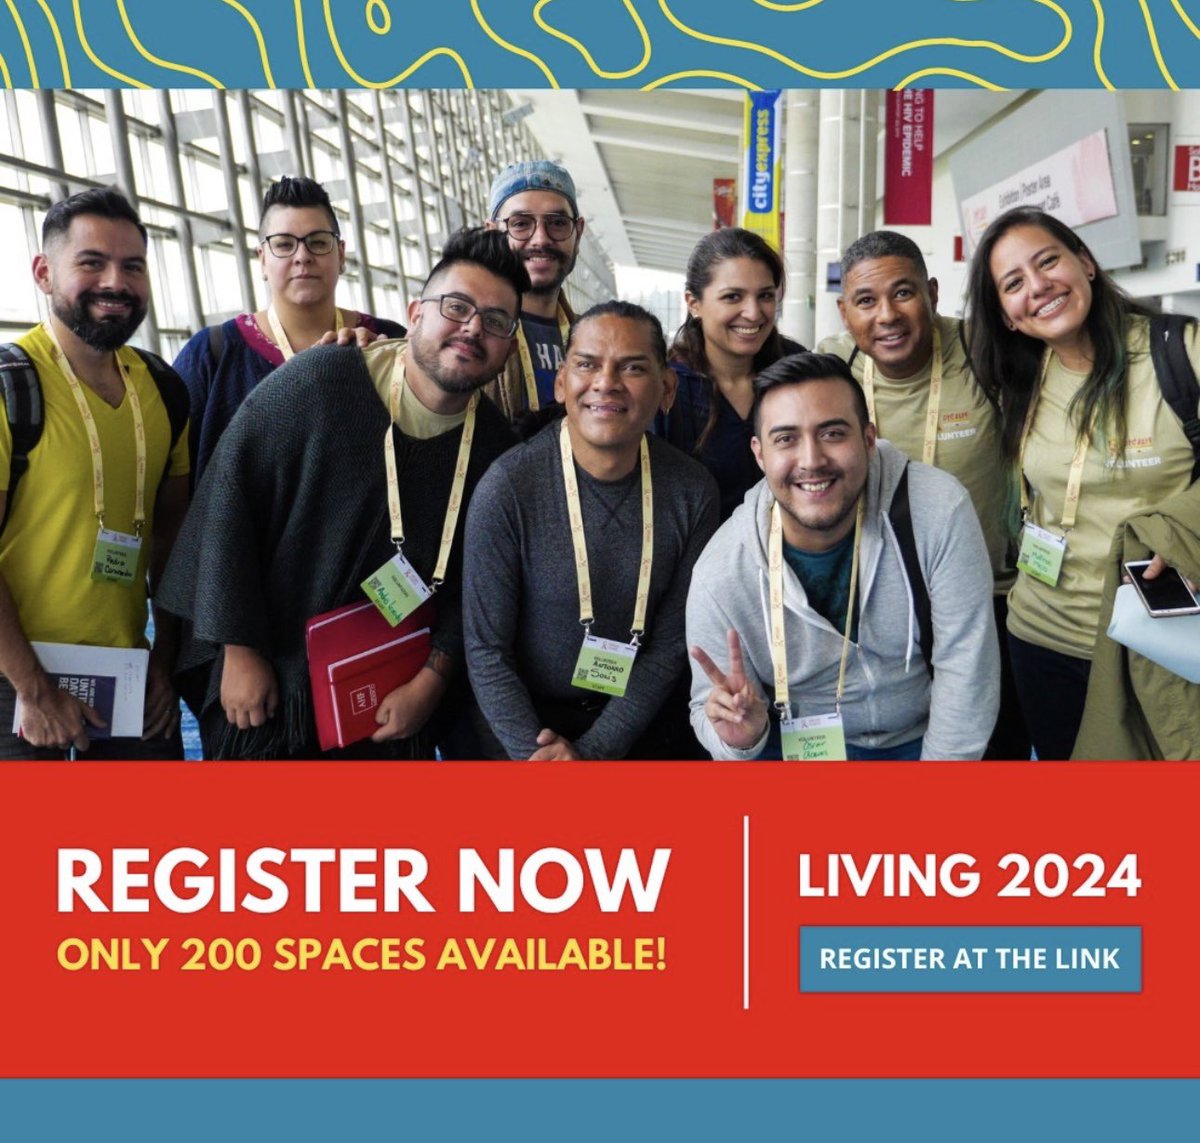 Apply to join a diverse community of #PLHIV for Living2024 Conference. Applications close on March 21st. surveymonkey.com/r/JT7W9LD 📌📍 #putcommunitiesfirst @gnpplus @yplus_global @aids_conference @iasociety @unaidsglobal